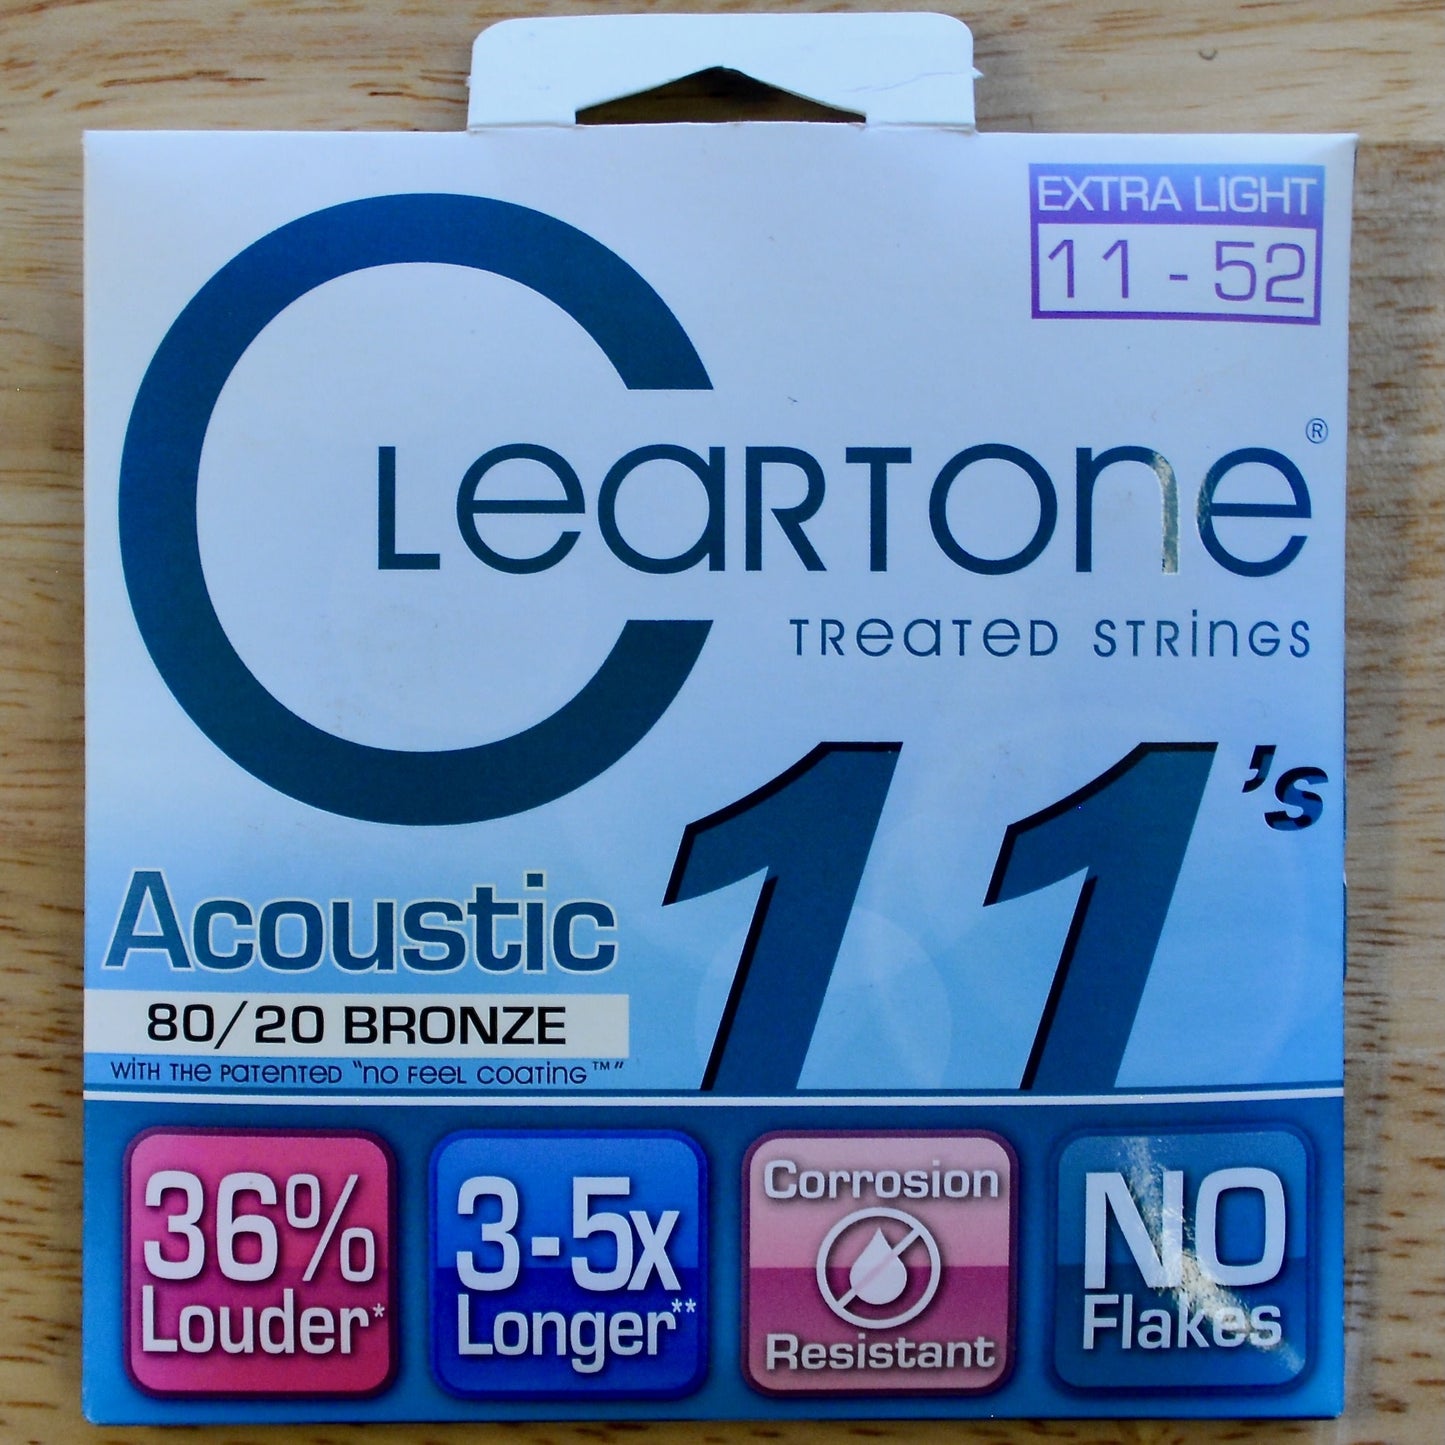 Cleartone Treated Acoustic Strings 80/20 Bronze Extra Light